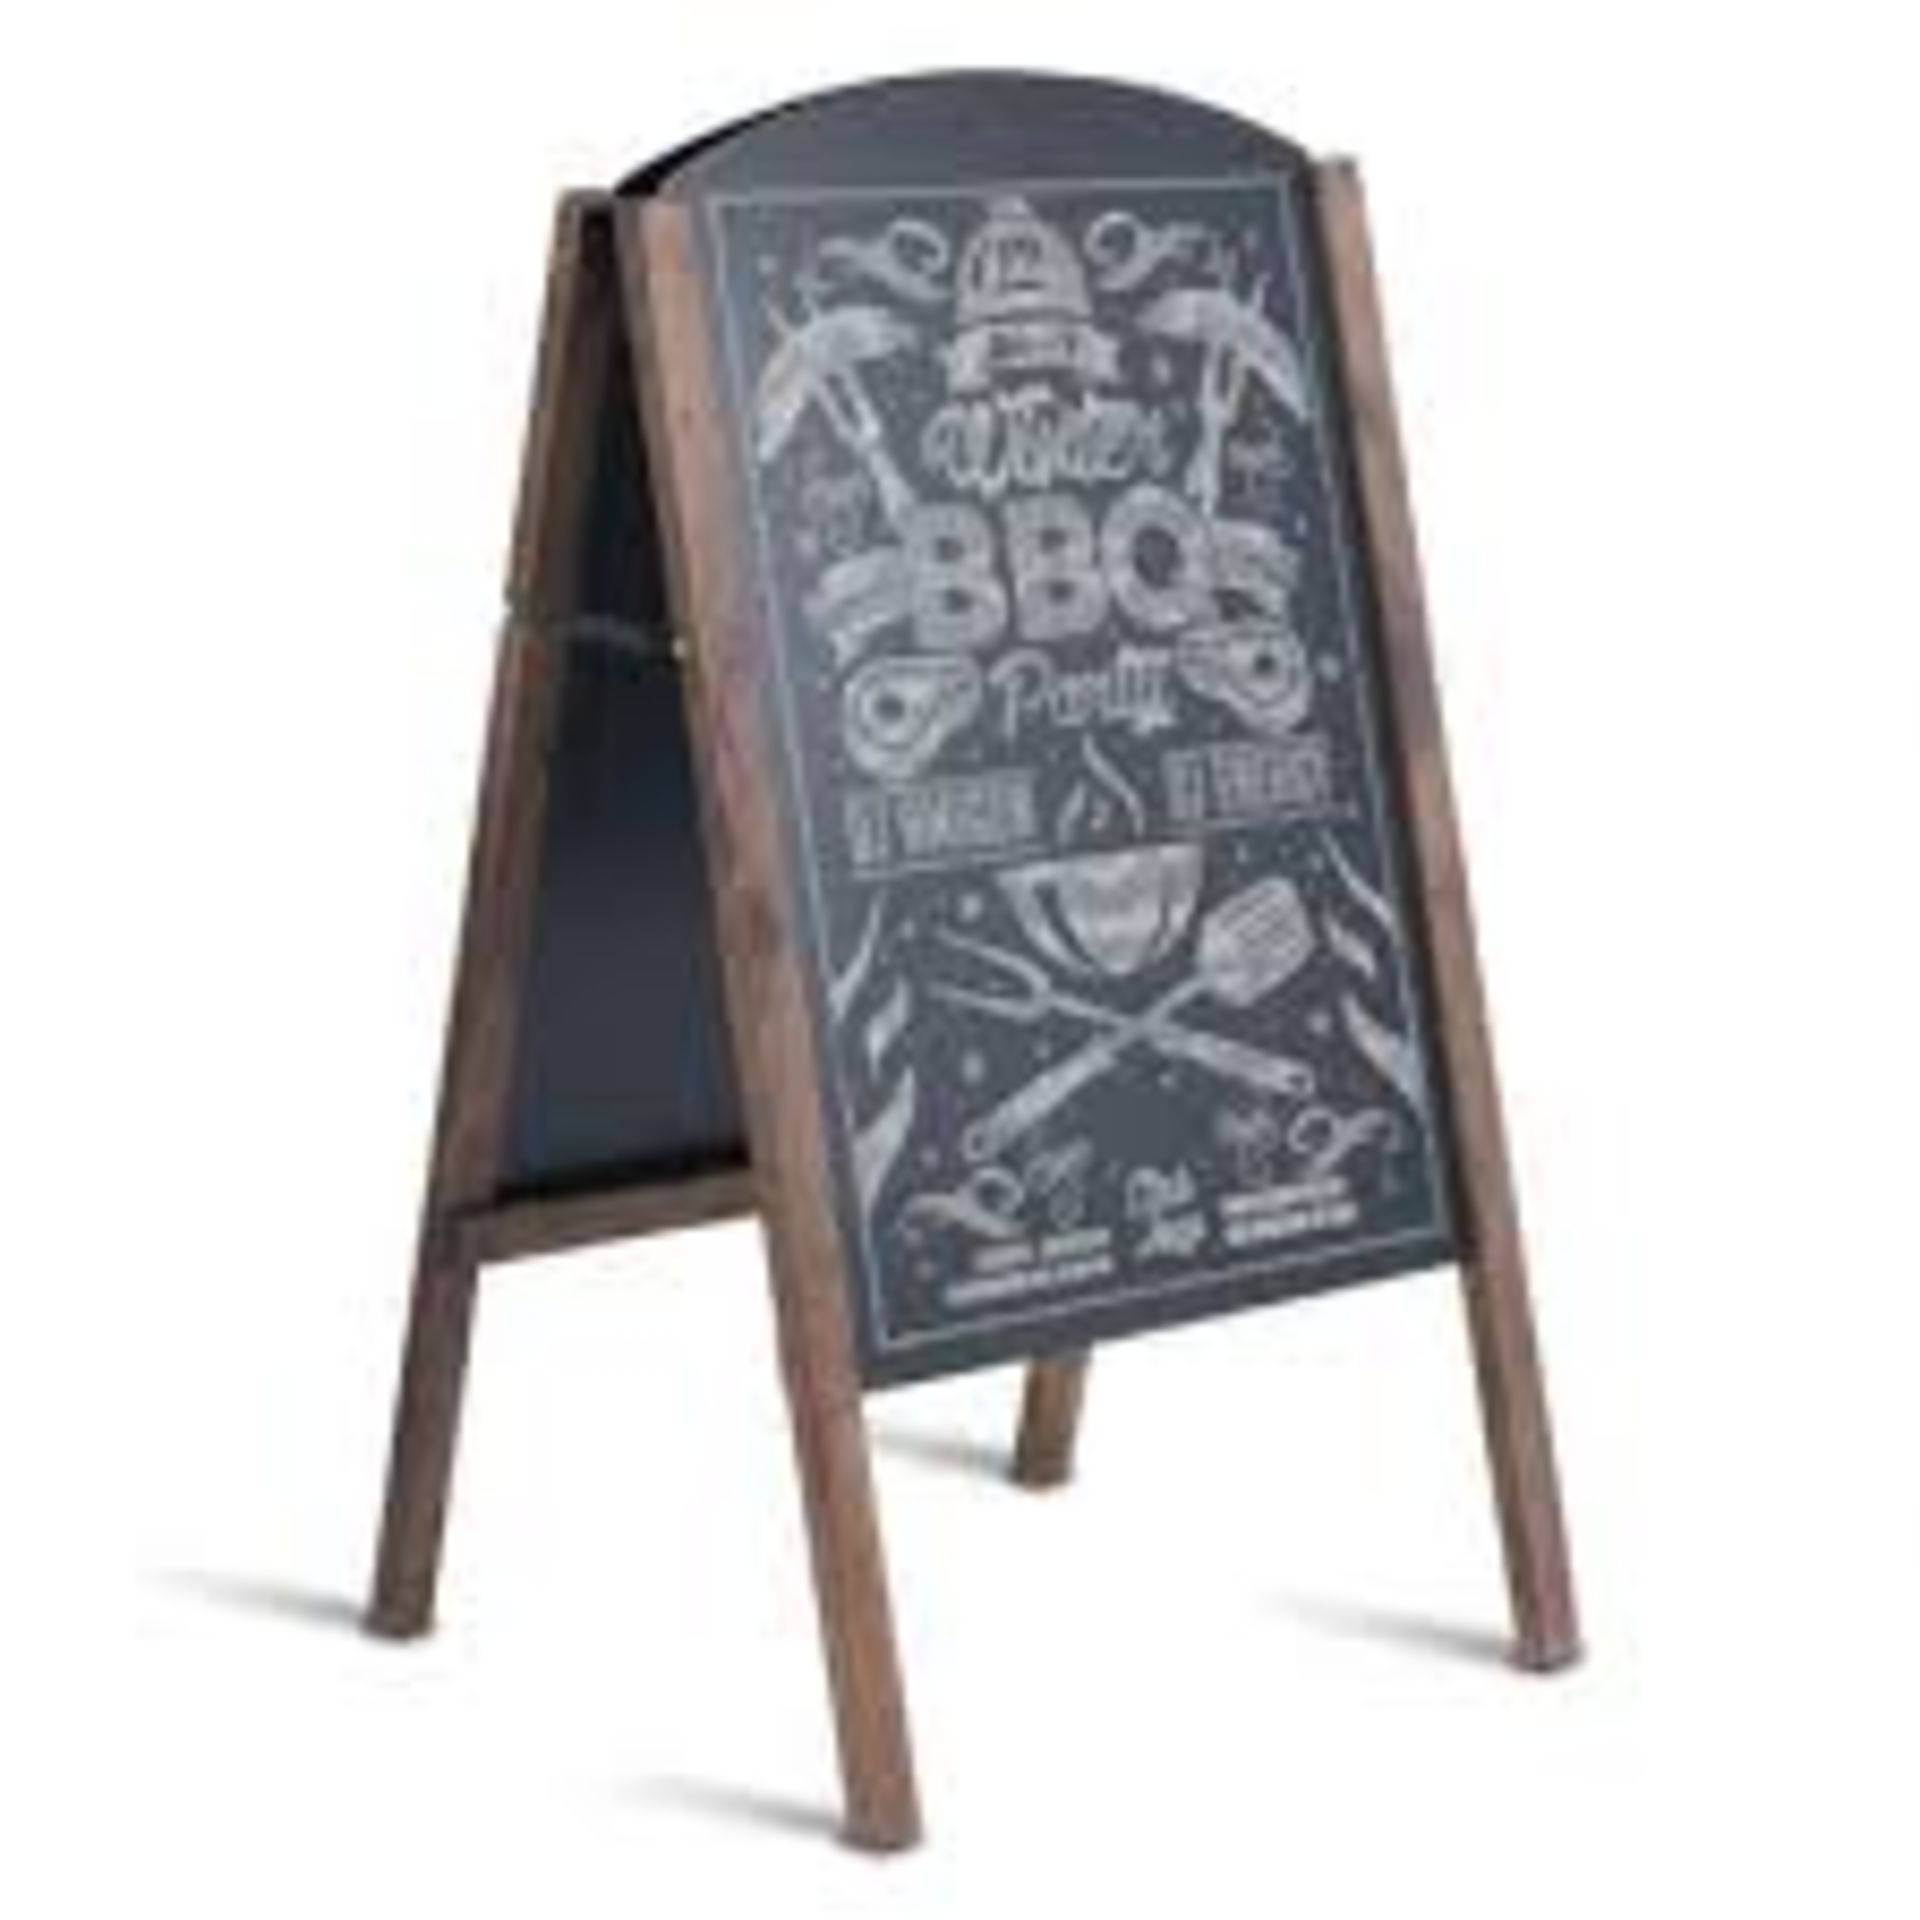 Double Sided "A" Frame Blackboard/ Chalkboard Sign. - R14.11. This "A" frame sign has double